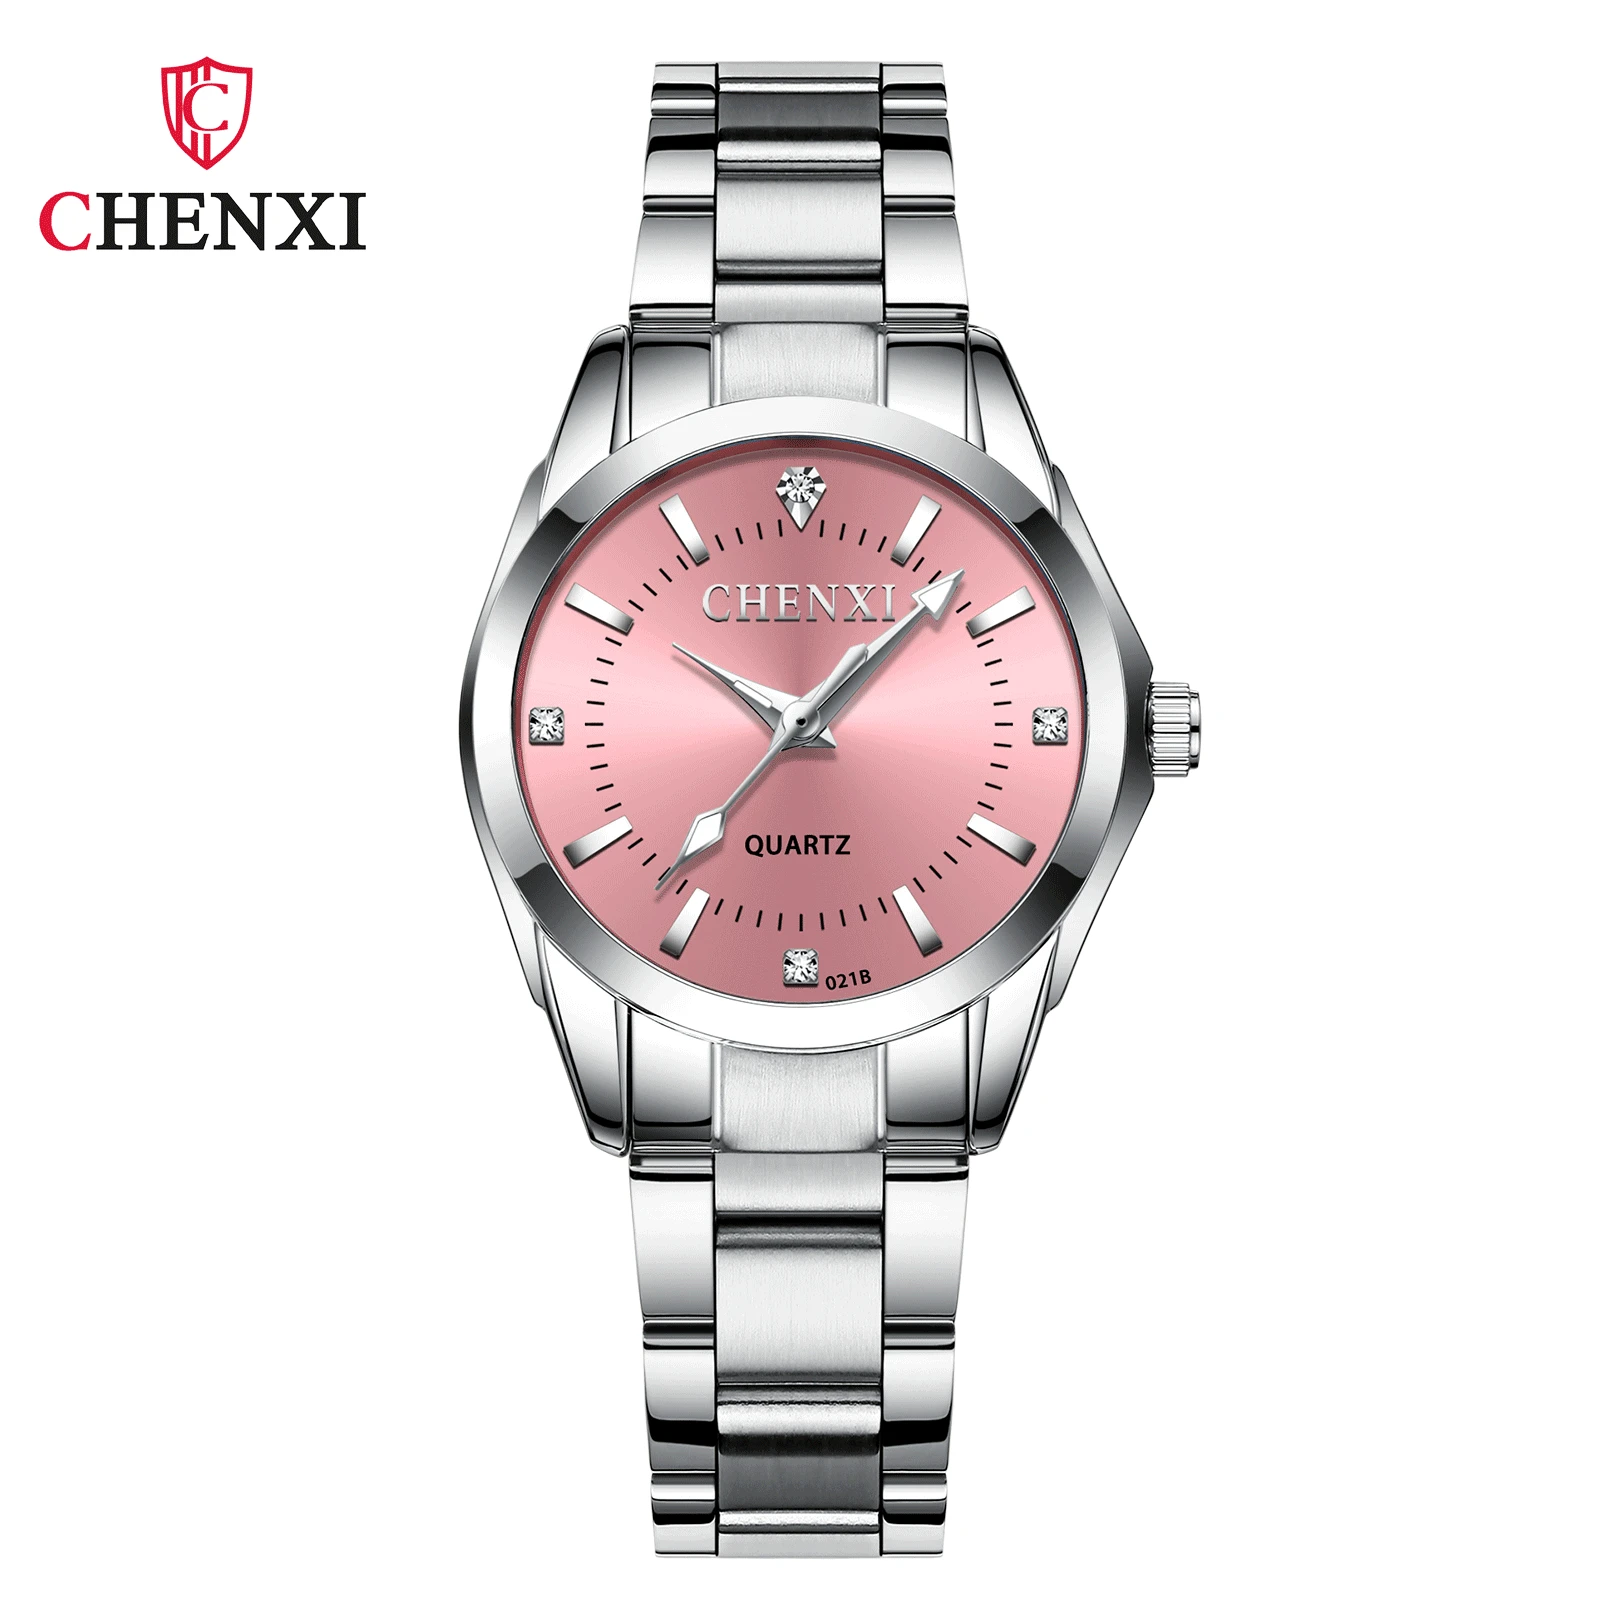 Men's and Women's Popular Watches Women's Watches Couple Watches Waterproof Watch Men's Quartz Watches Couple Items for Lovers